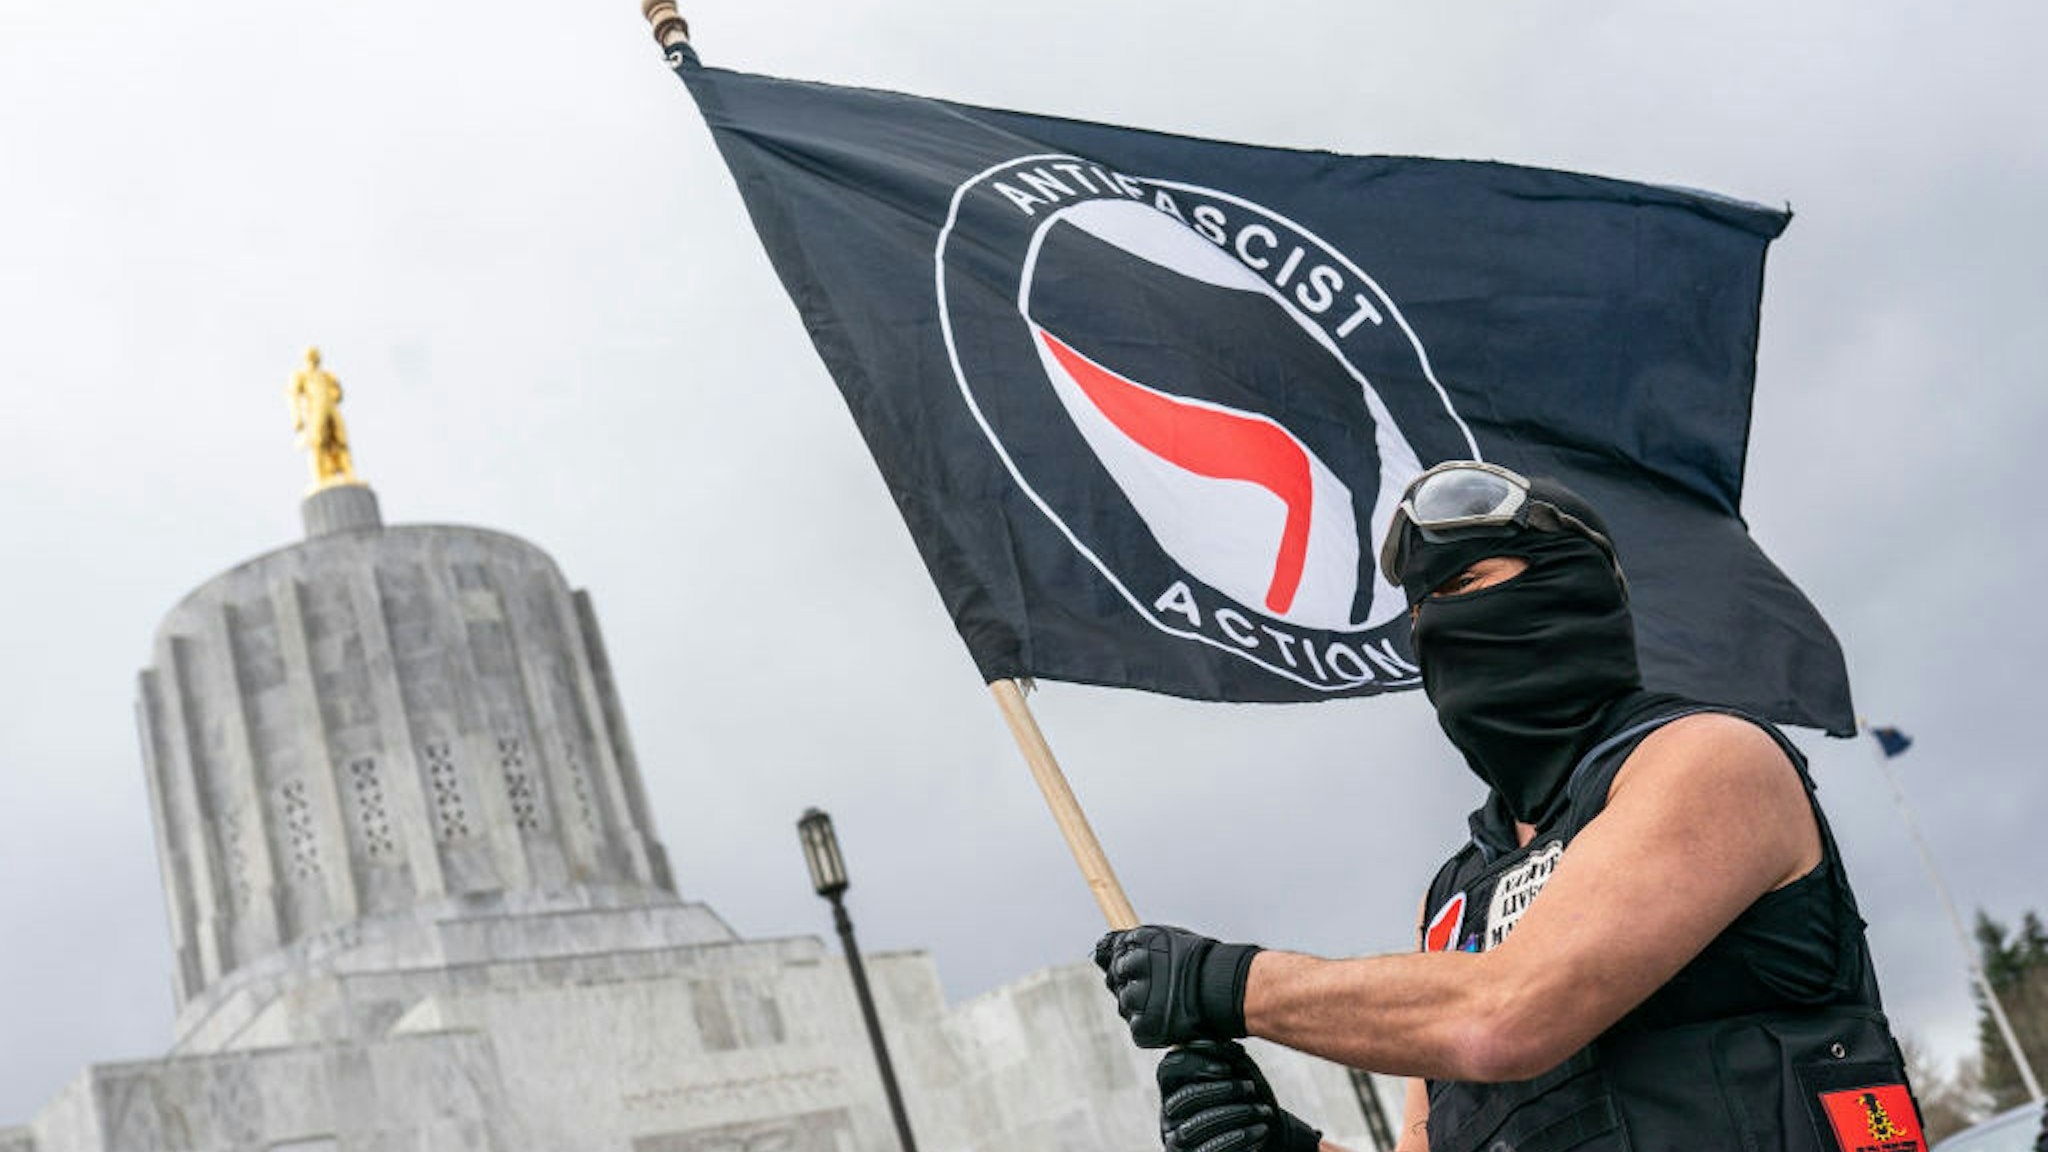 SALEM, OR - MARCH 28: A protester waves an anti-fascist flag at the Oregon statehouse on March 28, 2021 in Salem, Oregon. The protesters clashed with occupants of vehicles that had participated in an American flag-waving car caravan, despite law enforcements efforts to to keep the groups separate. (Photo by Nathan Howard/Getty Images)